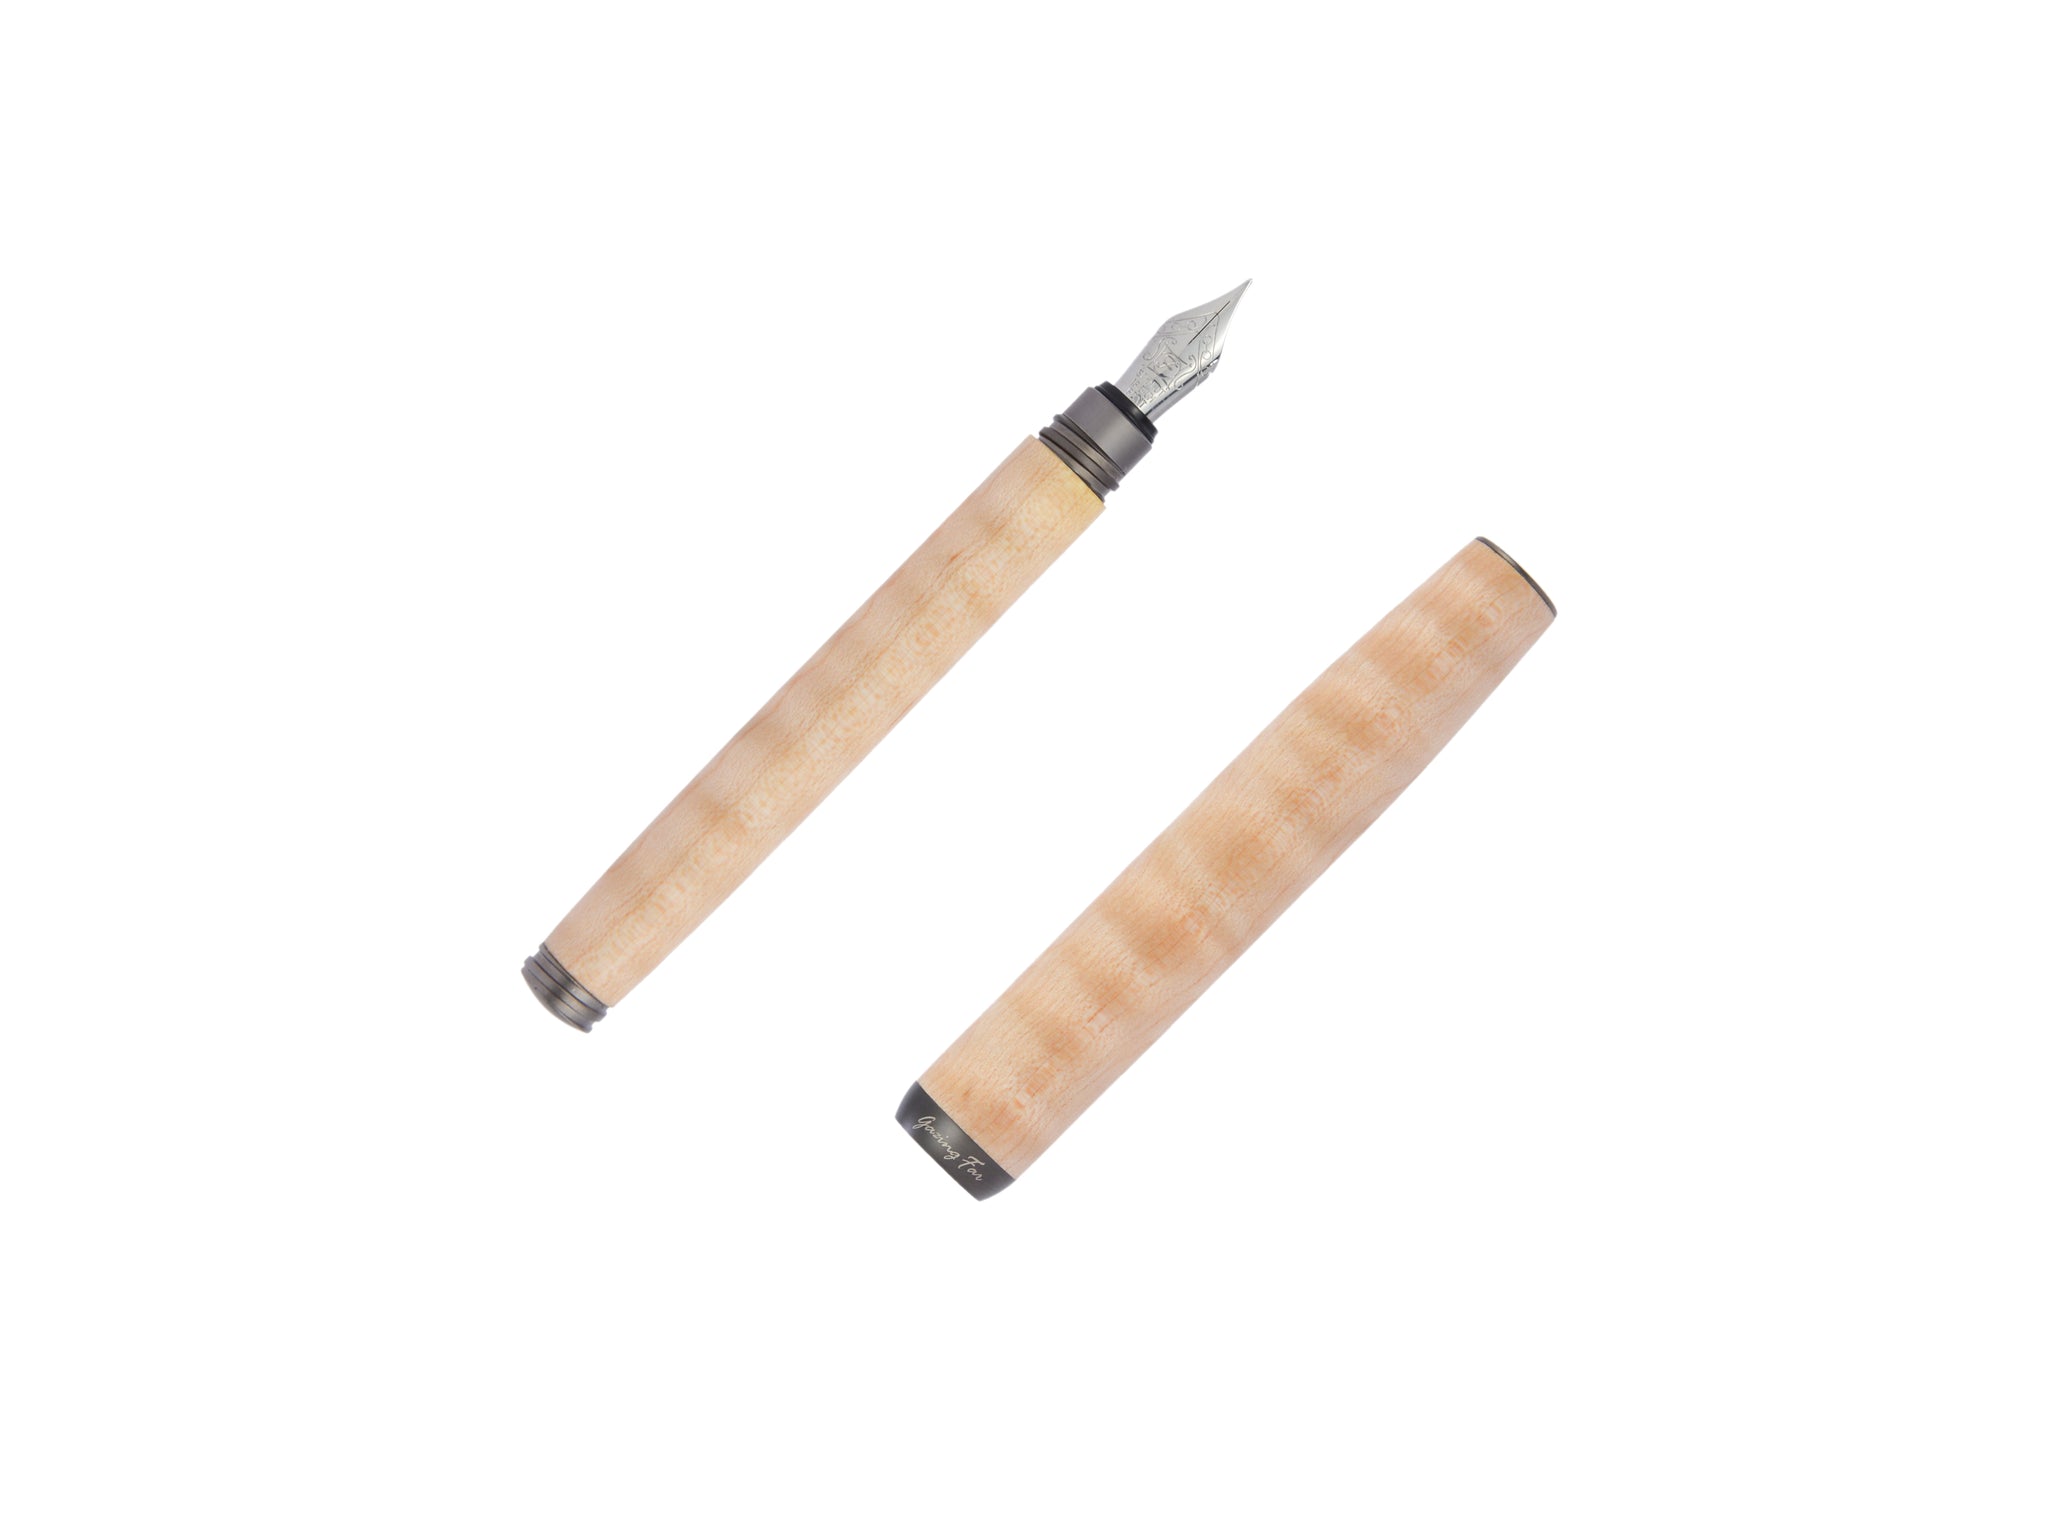 tmX, the most tiny wooden fountain pen